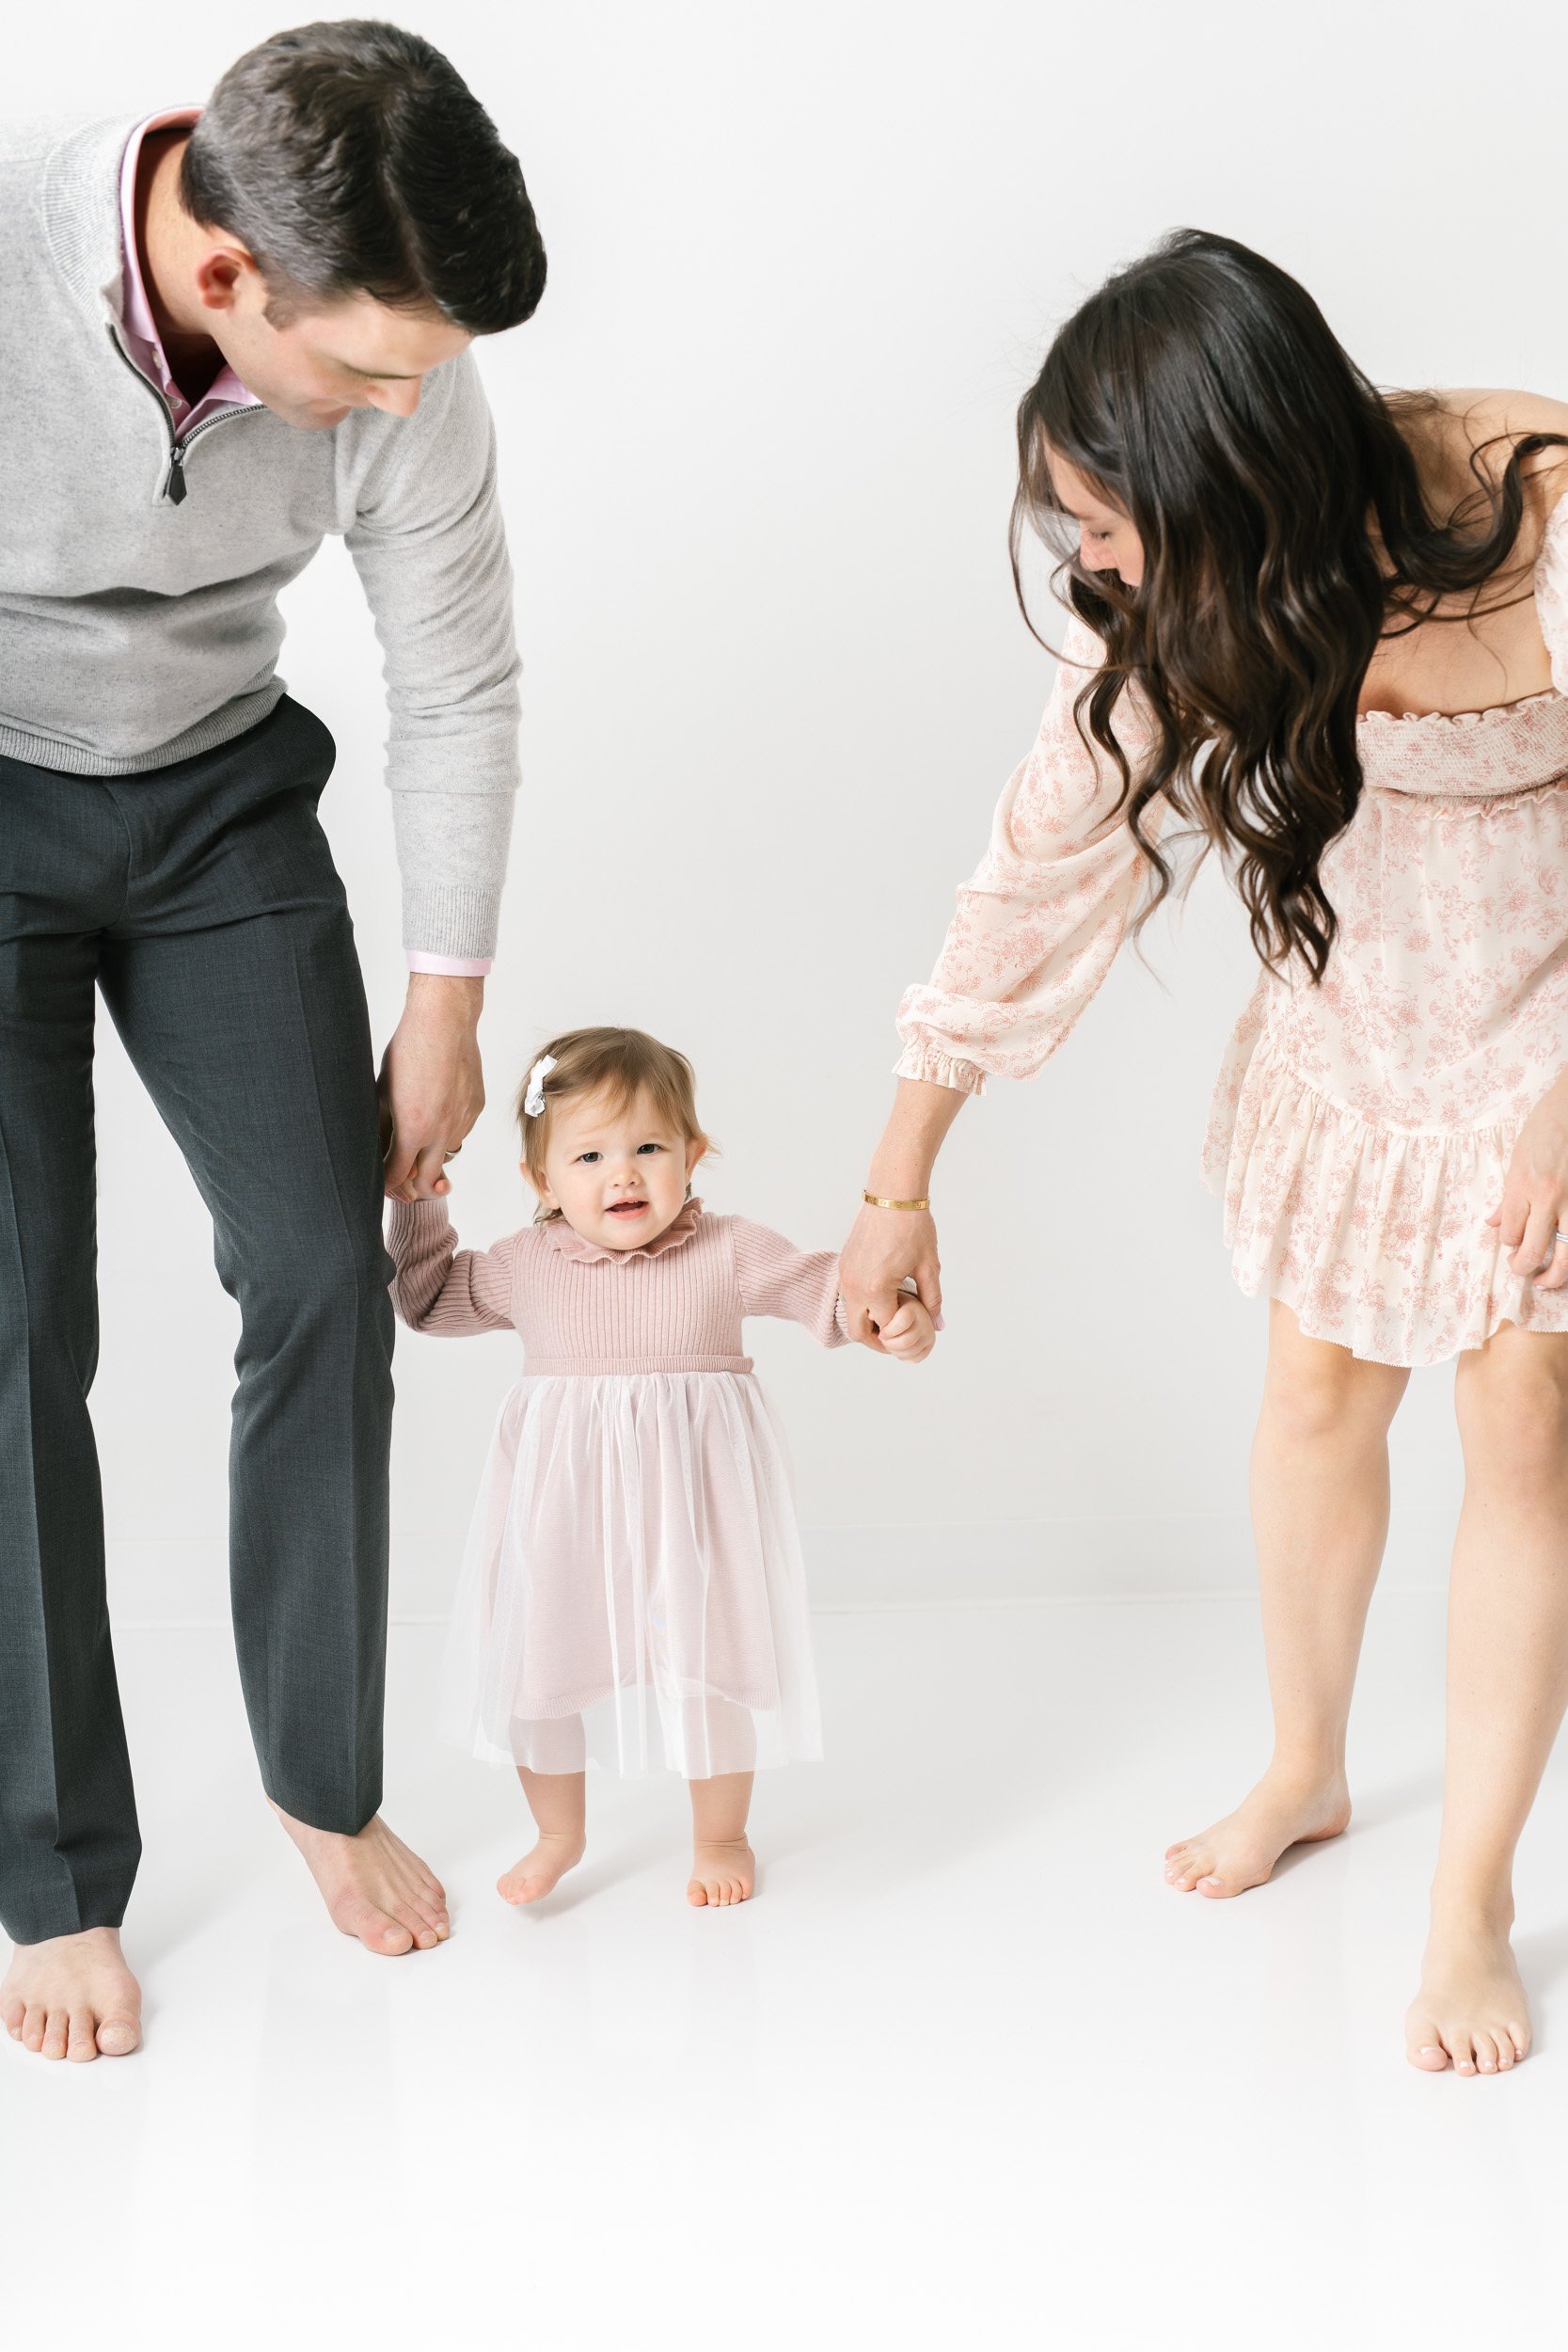  A husband and wife holding their baby girl’s hands helping her walk by Nicole Hawkins Photography. family of three #NicoleHawkinsPhotography #NicoleHawkinsBabies #studiochildren #firstbirthday #studiophotography #girlsbirthdayportraits 